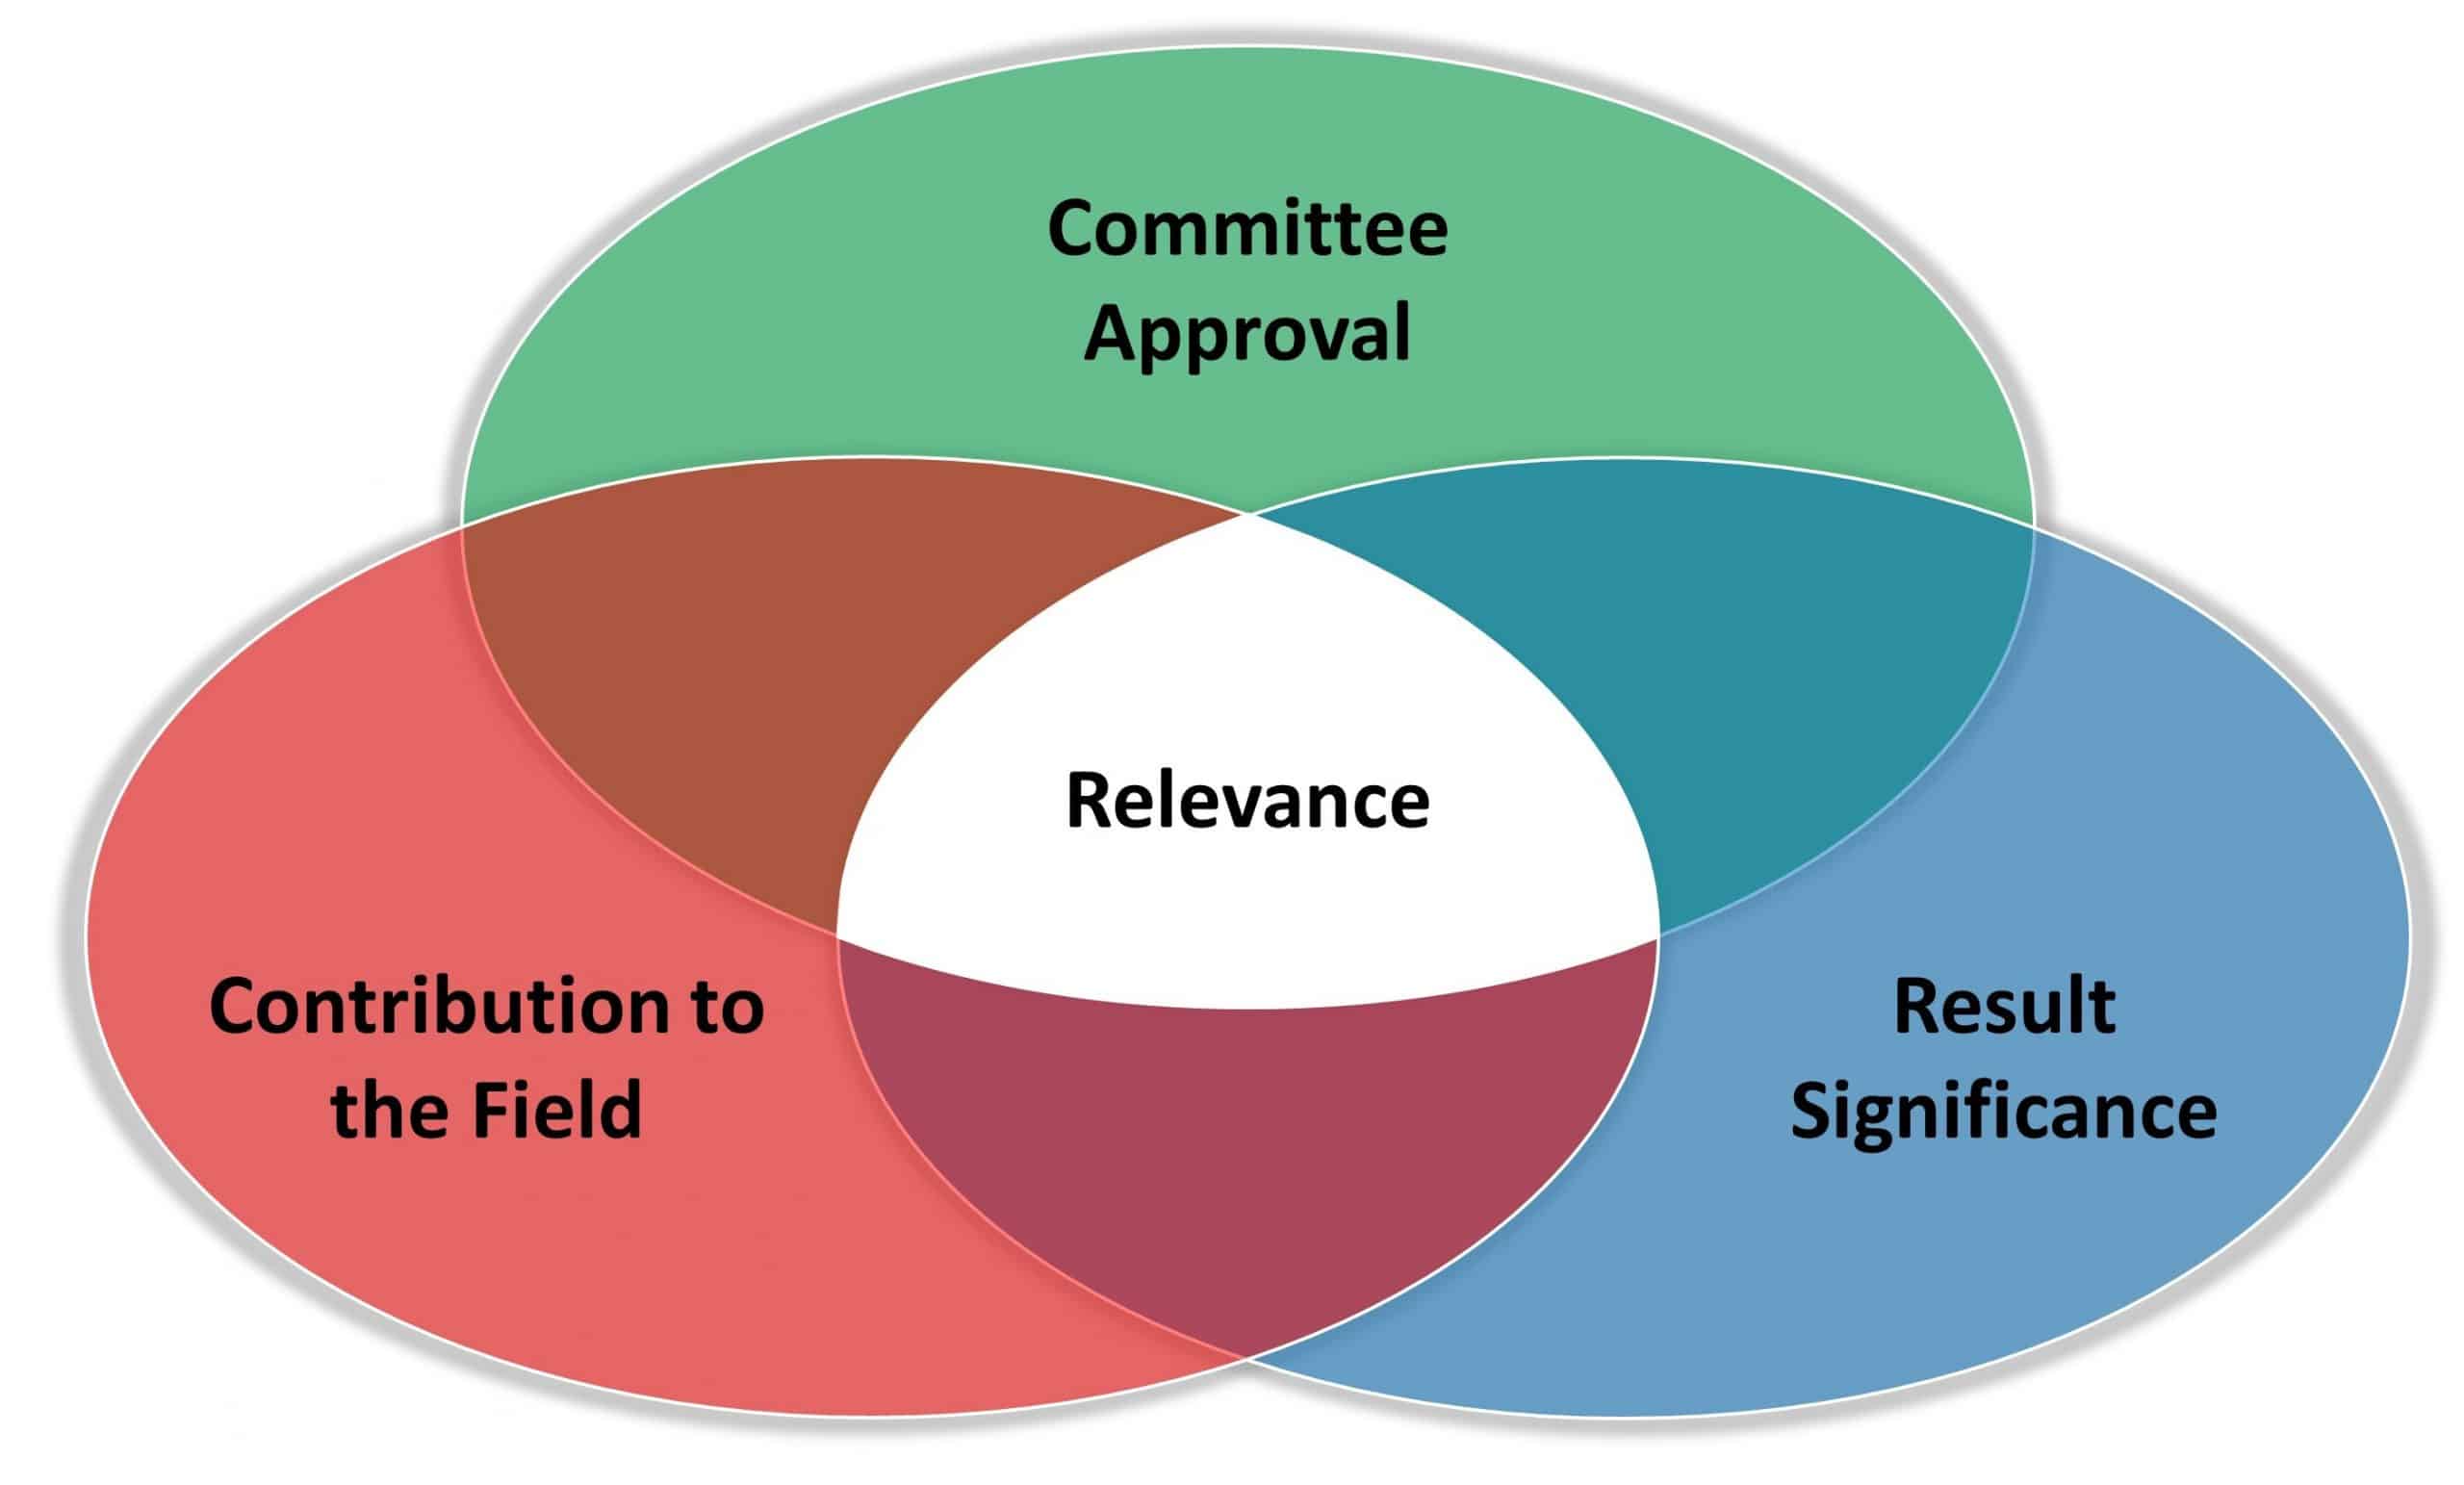 Venn diagram with Committee Approval, Contribution to the Field, and Result Significance overlapping, and Relevance in the center